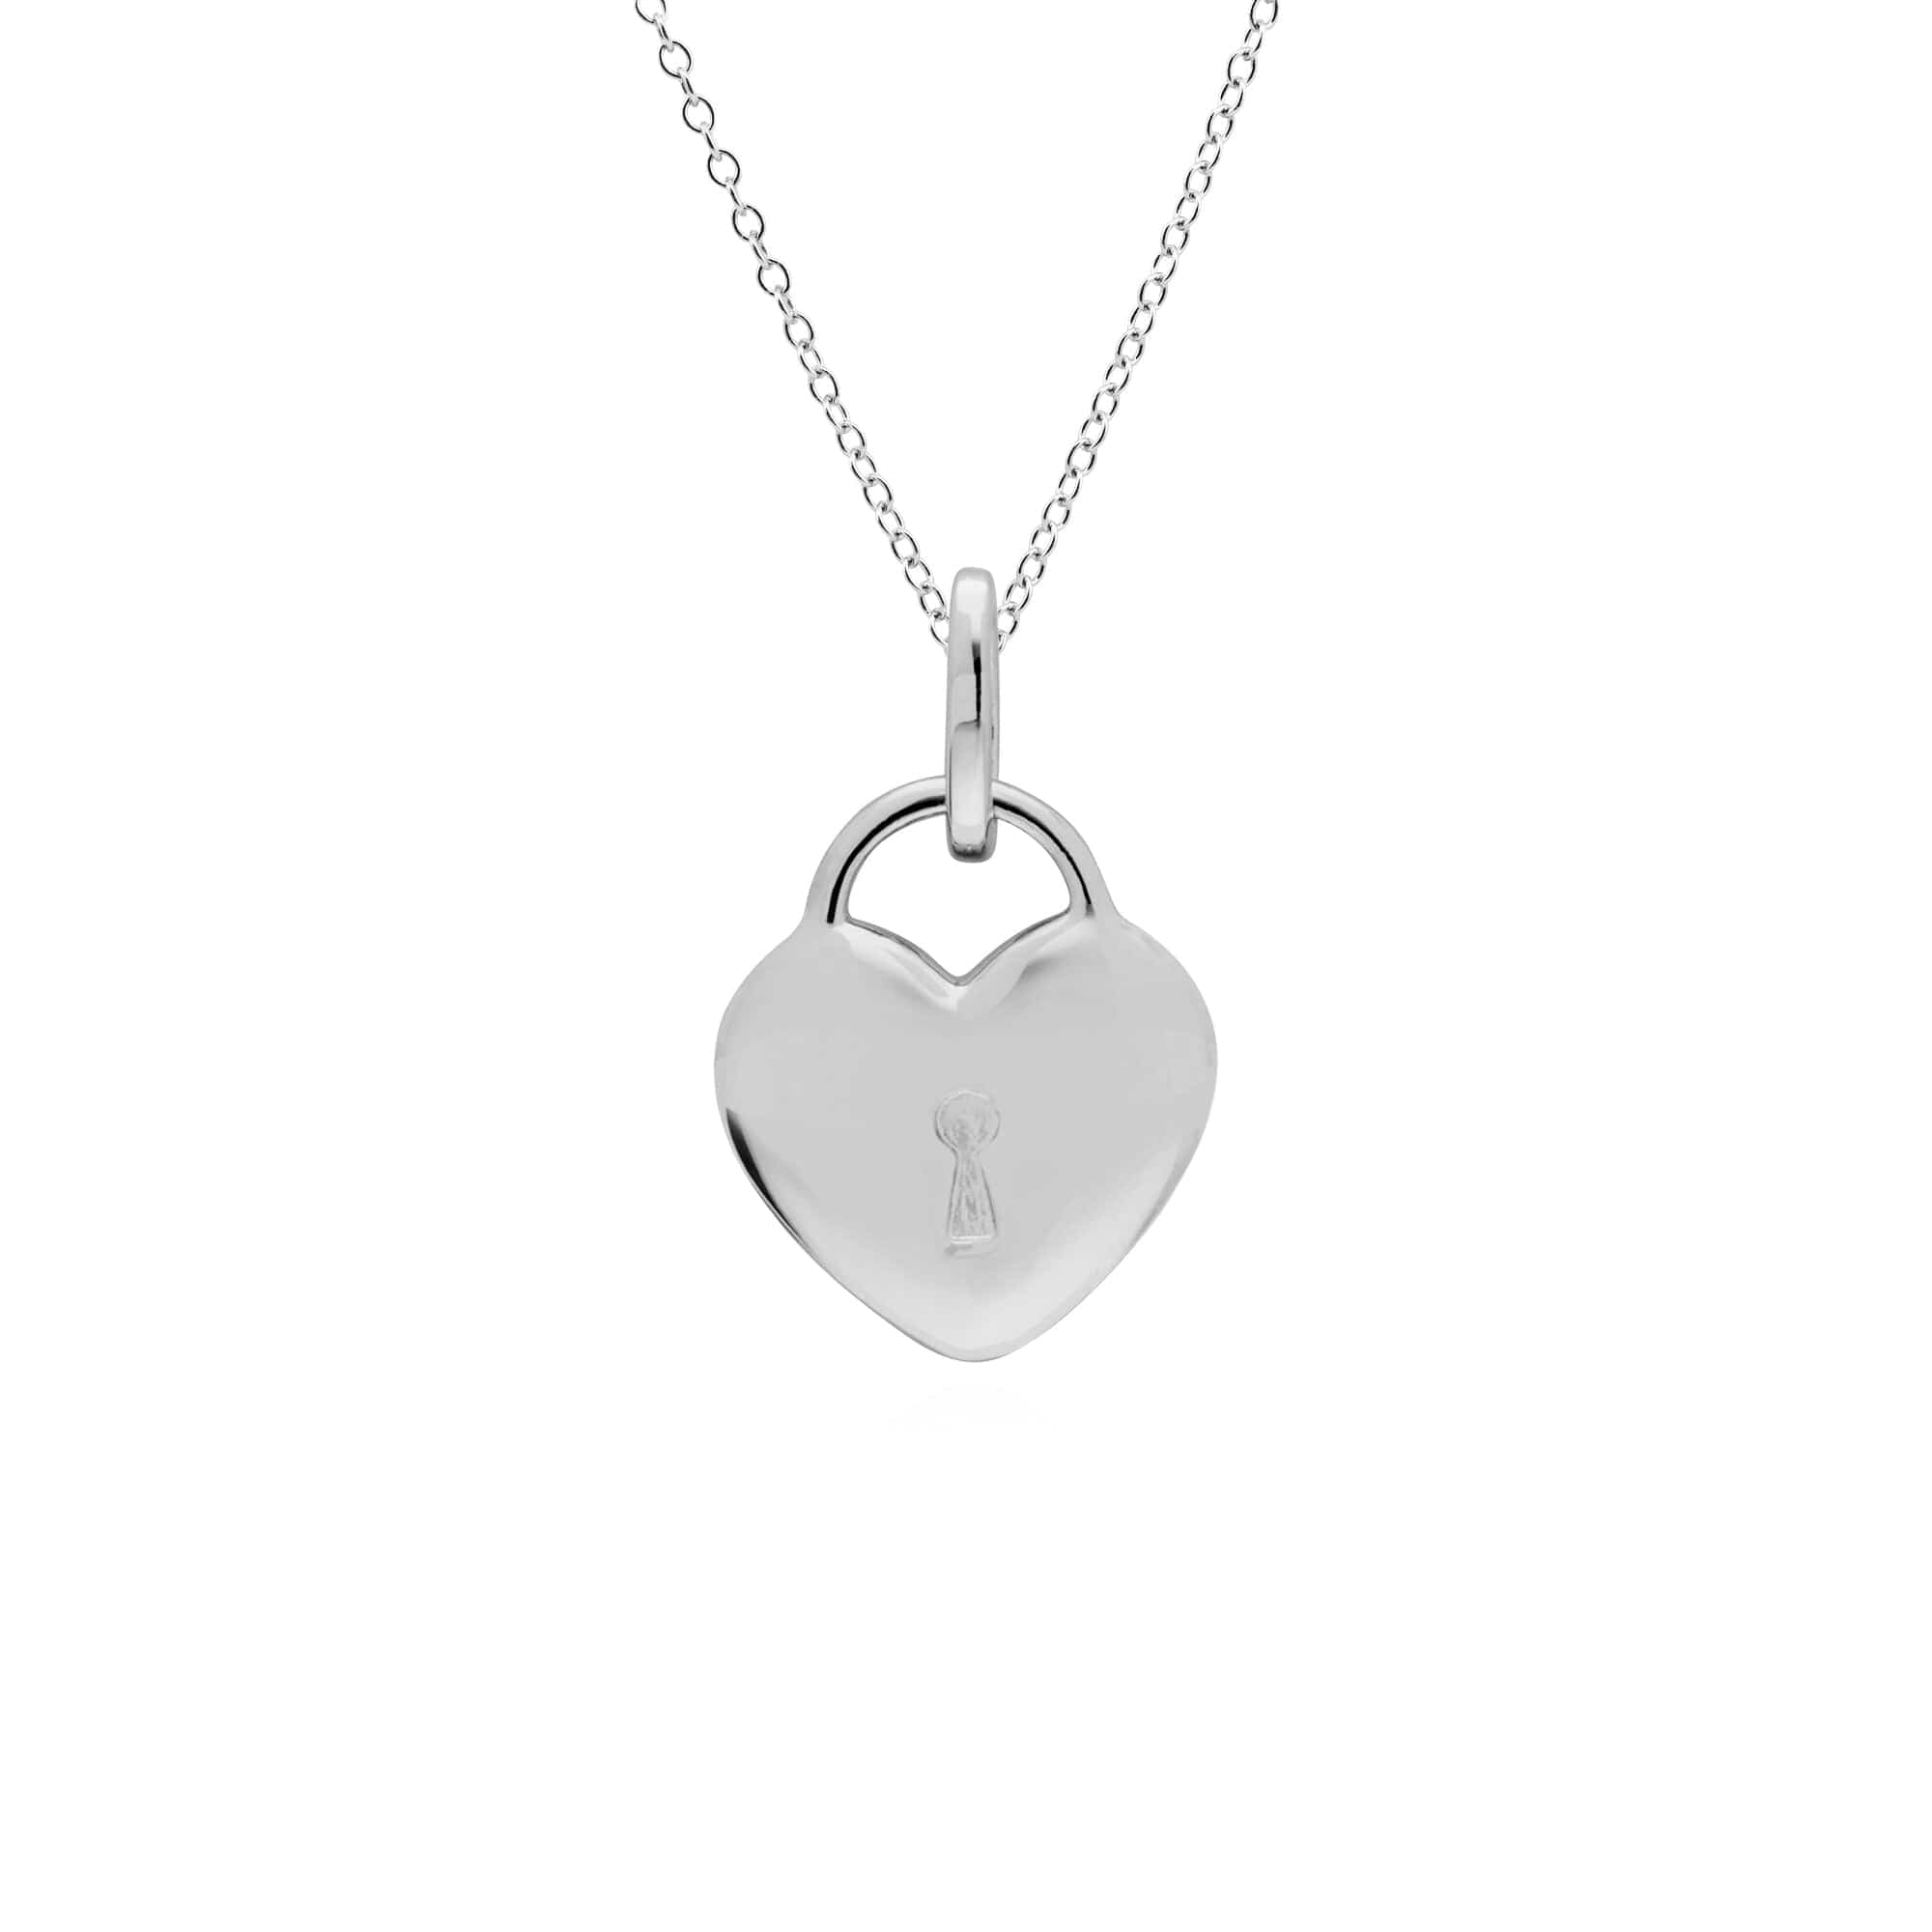 270P026201925-270P027001925 Classic Heart Lock Pendant & Pearl Big Key Charm in 925 Sterling Silver 3